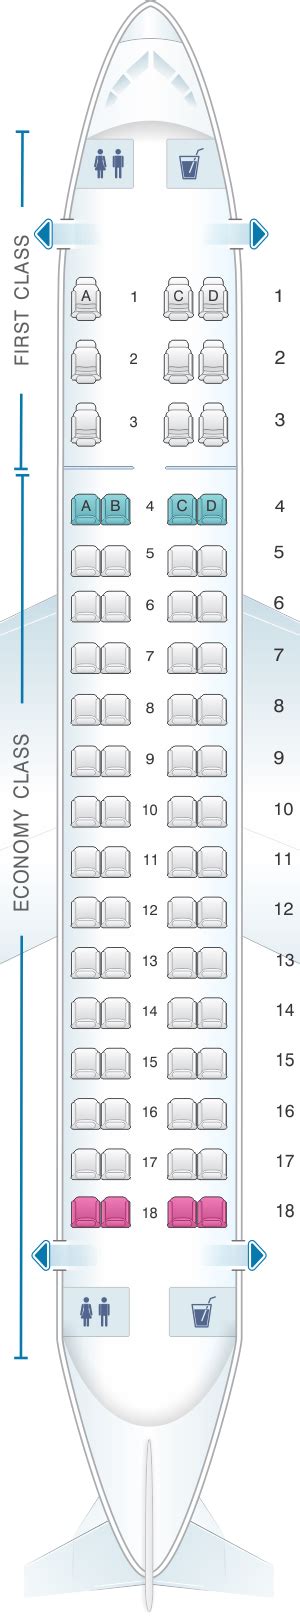 For your next American Airlines flight, use this seating chart to get the most comfortable seats, legroom, and recline on . Seat Maps; Airlines; Cheap Flights; Comparison Charts. Short-haul Economy Class ... Embraer ERJ-140 (ERD) Embraer ERJ-145 (ER4) Embraer ERJ-175 (E75) Layout 1; Embraer ERJ-175 (E75) Layout 2; Check-in; Baggage; Infants .... 